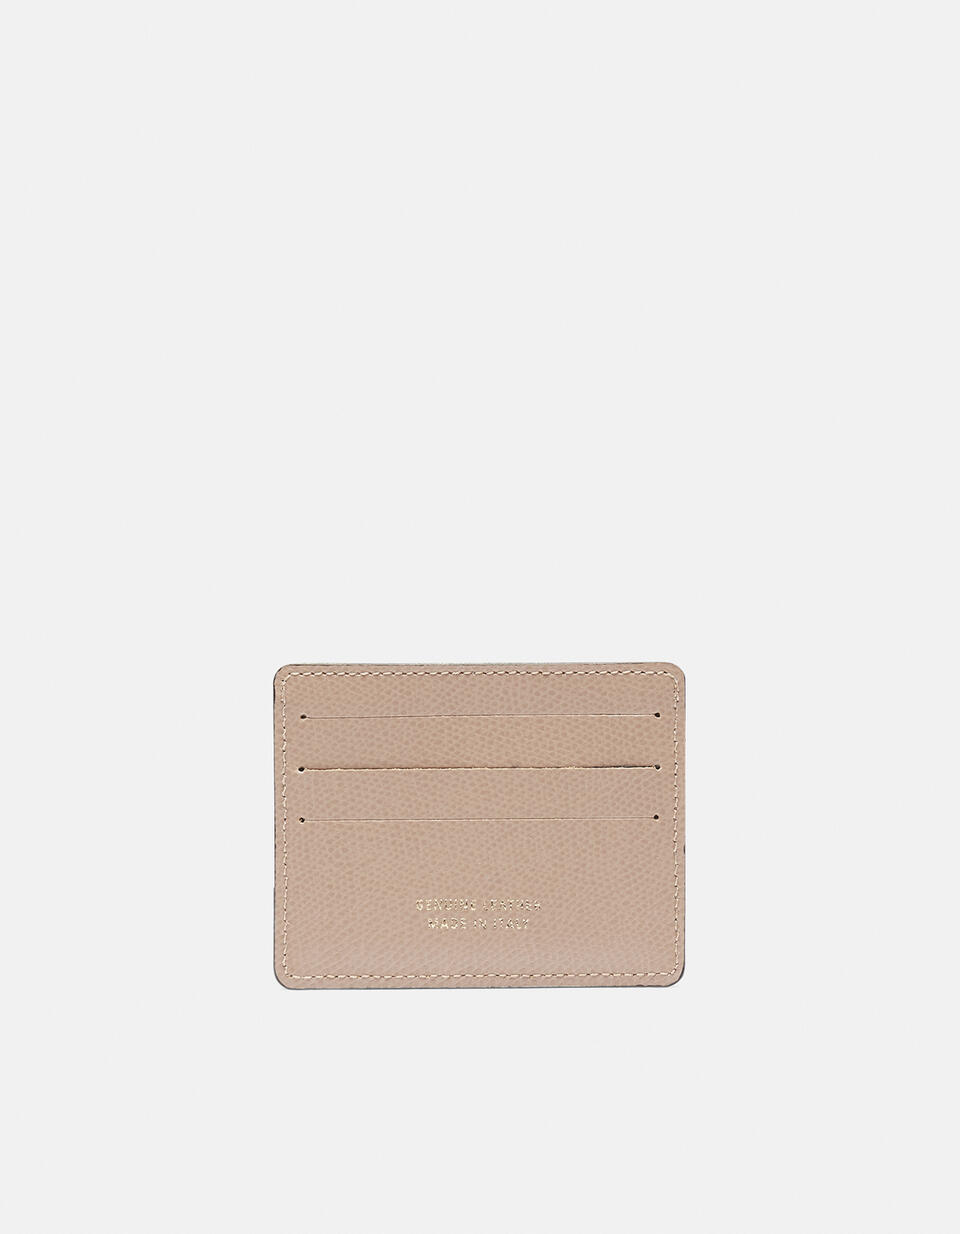 Bella credit car holder with space for banknotes - Card Holders - Women's Wallets | Wallets LIGHT PINK - Card Holders - Women's Wallets | WalletsCuoieria Fiorentina